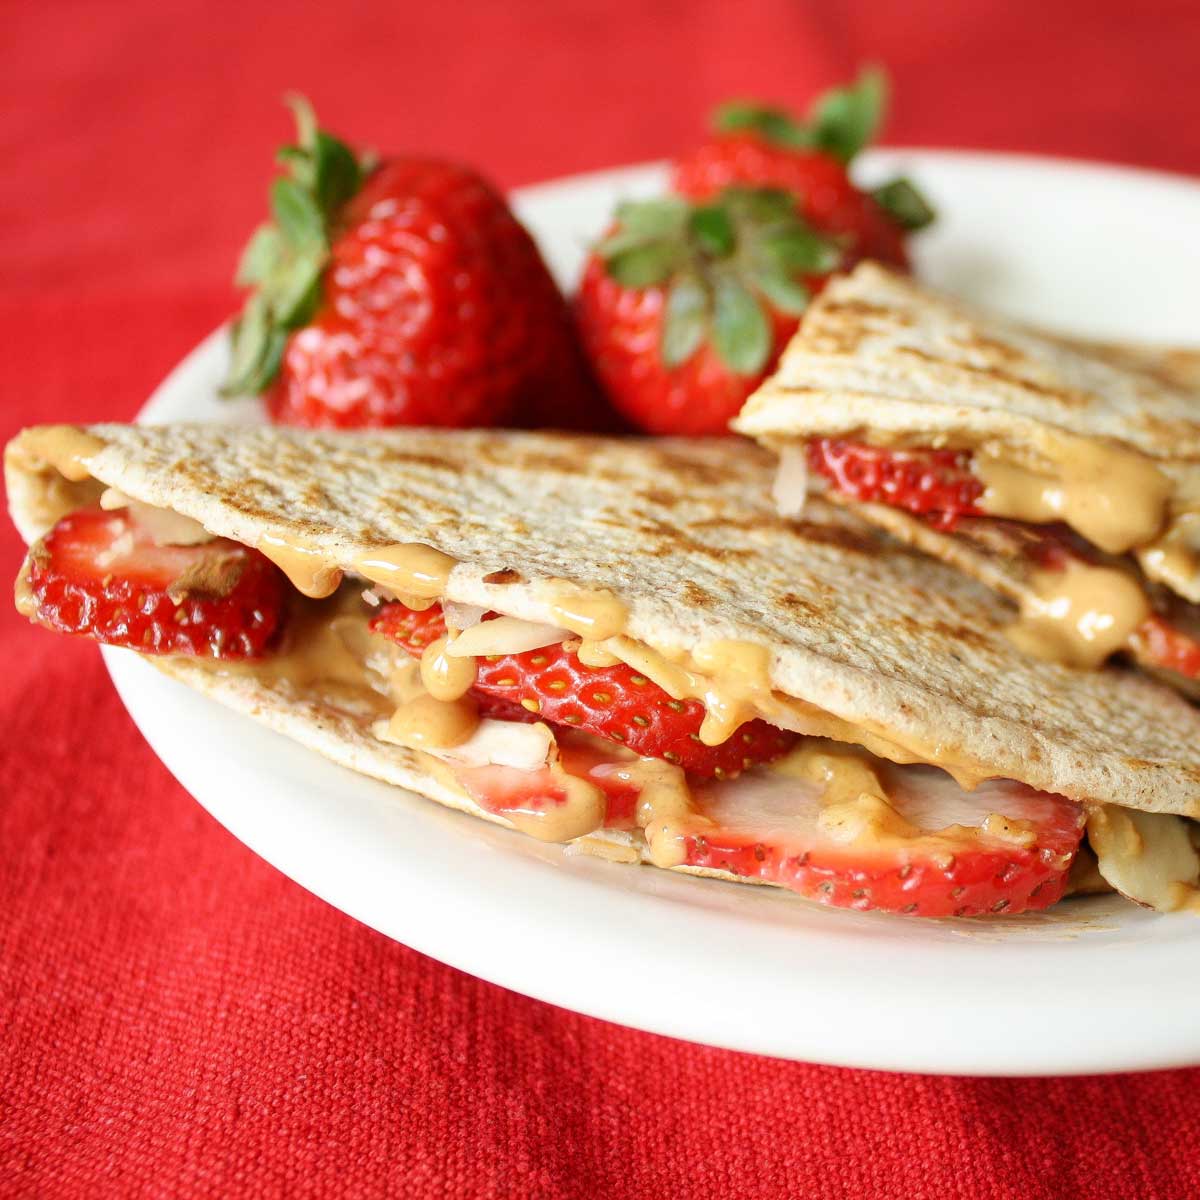 Side view of tortilla wedge so you can see the berries, nuts and peanut butter inside; red background with 3 strawberries.